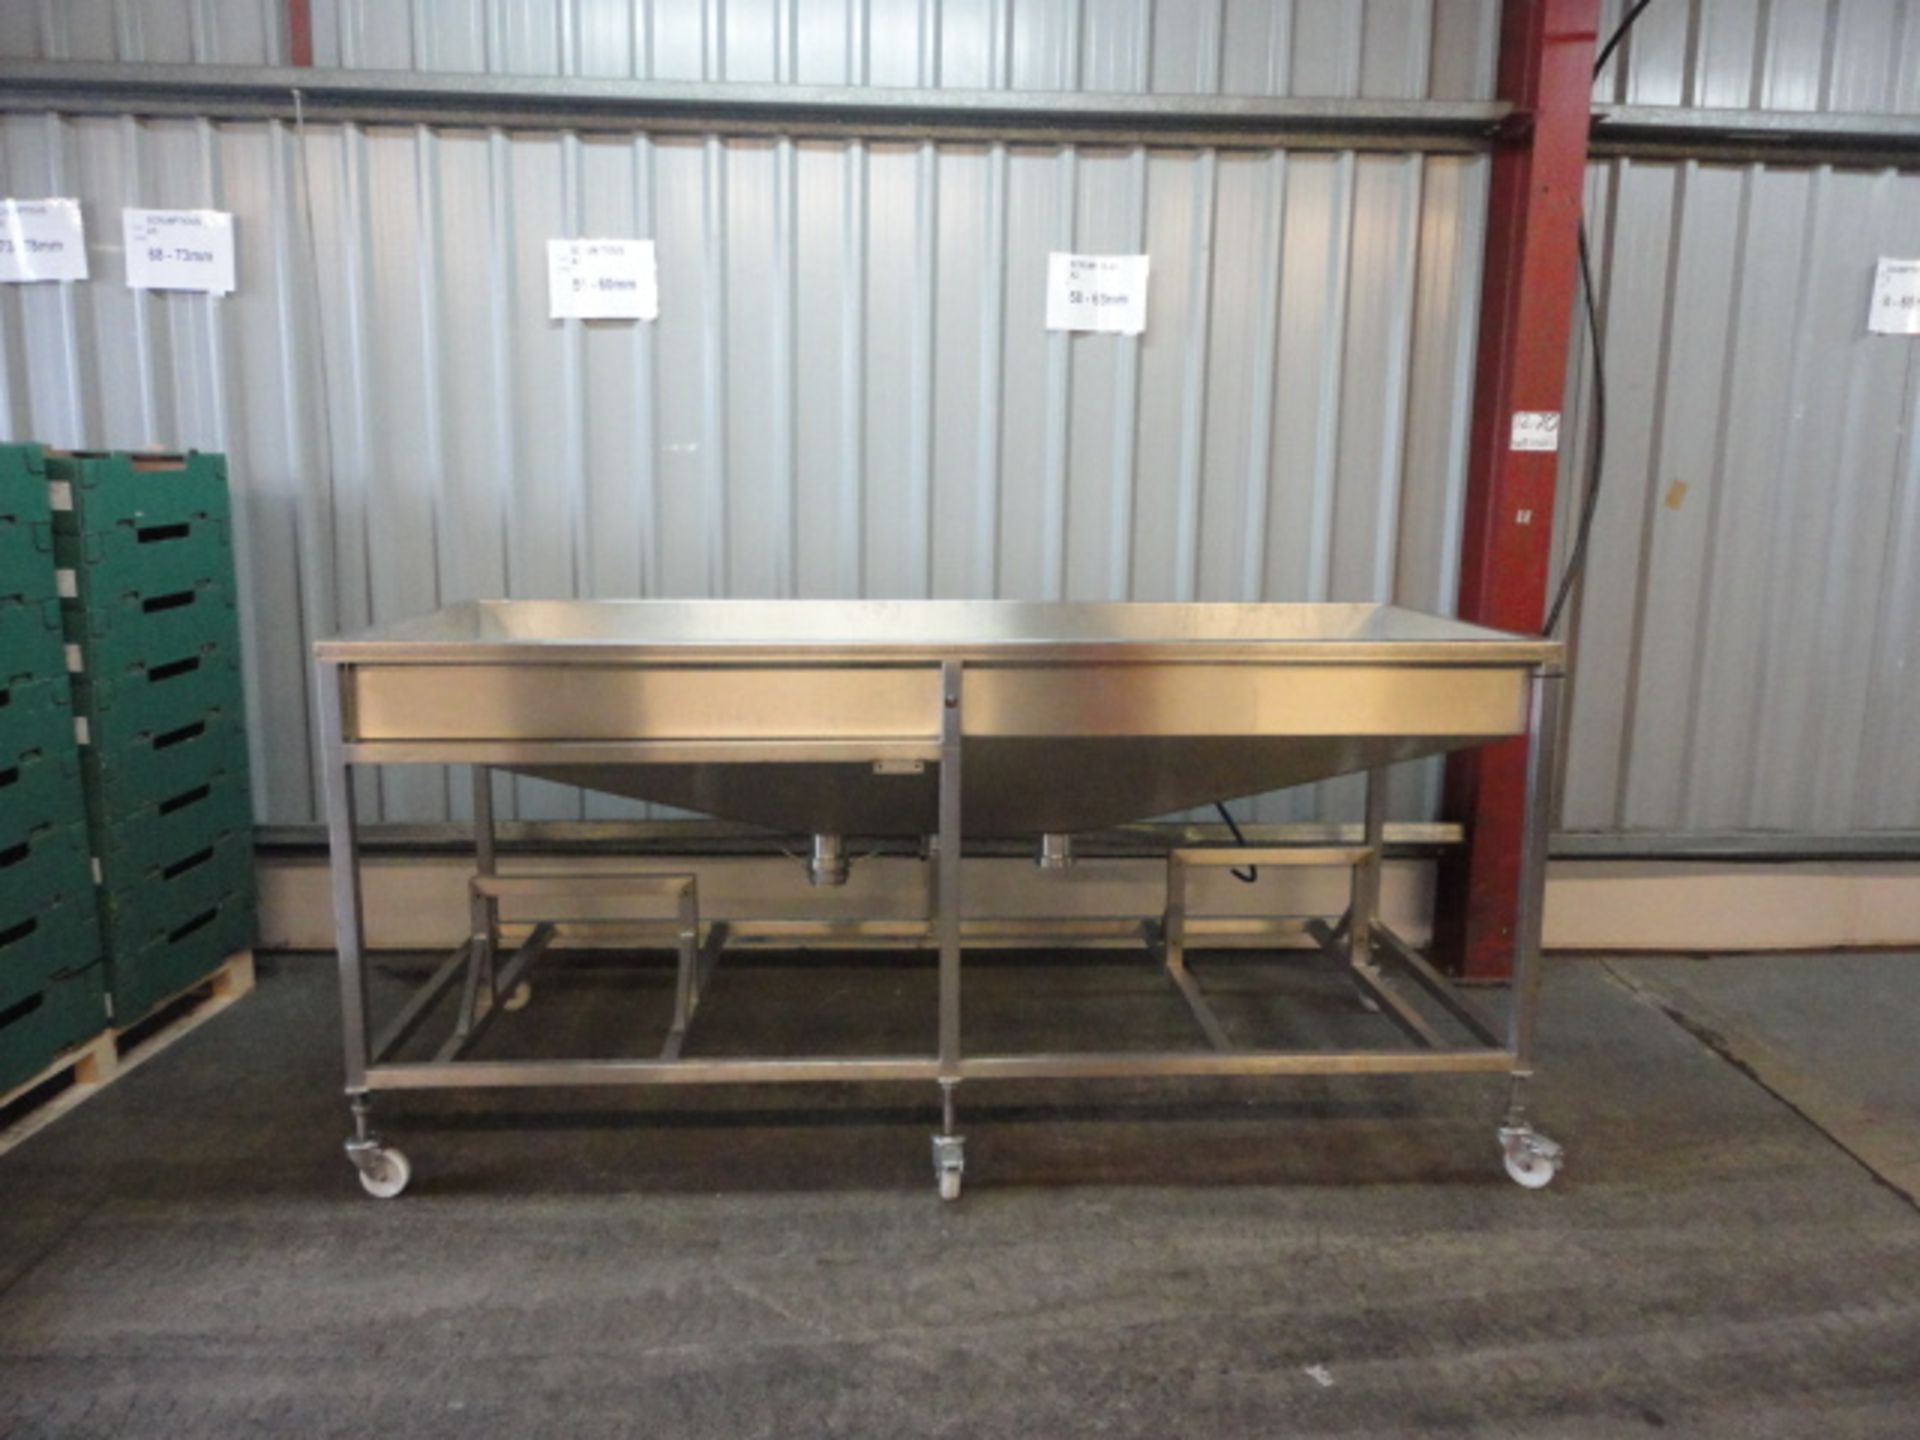 Stainless steel Trough/ WASH FLUME approx. 2500mm long x 1000mm front to back ON WHEELS LIFT OUT £30